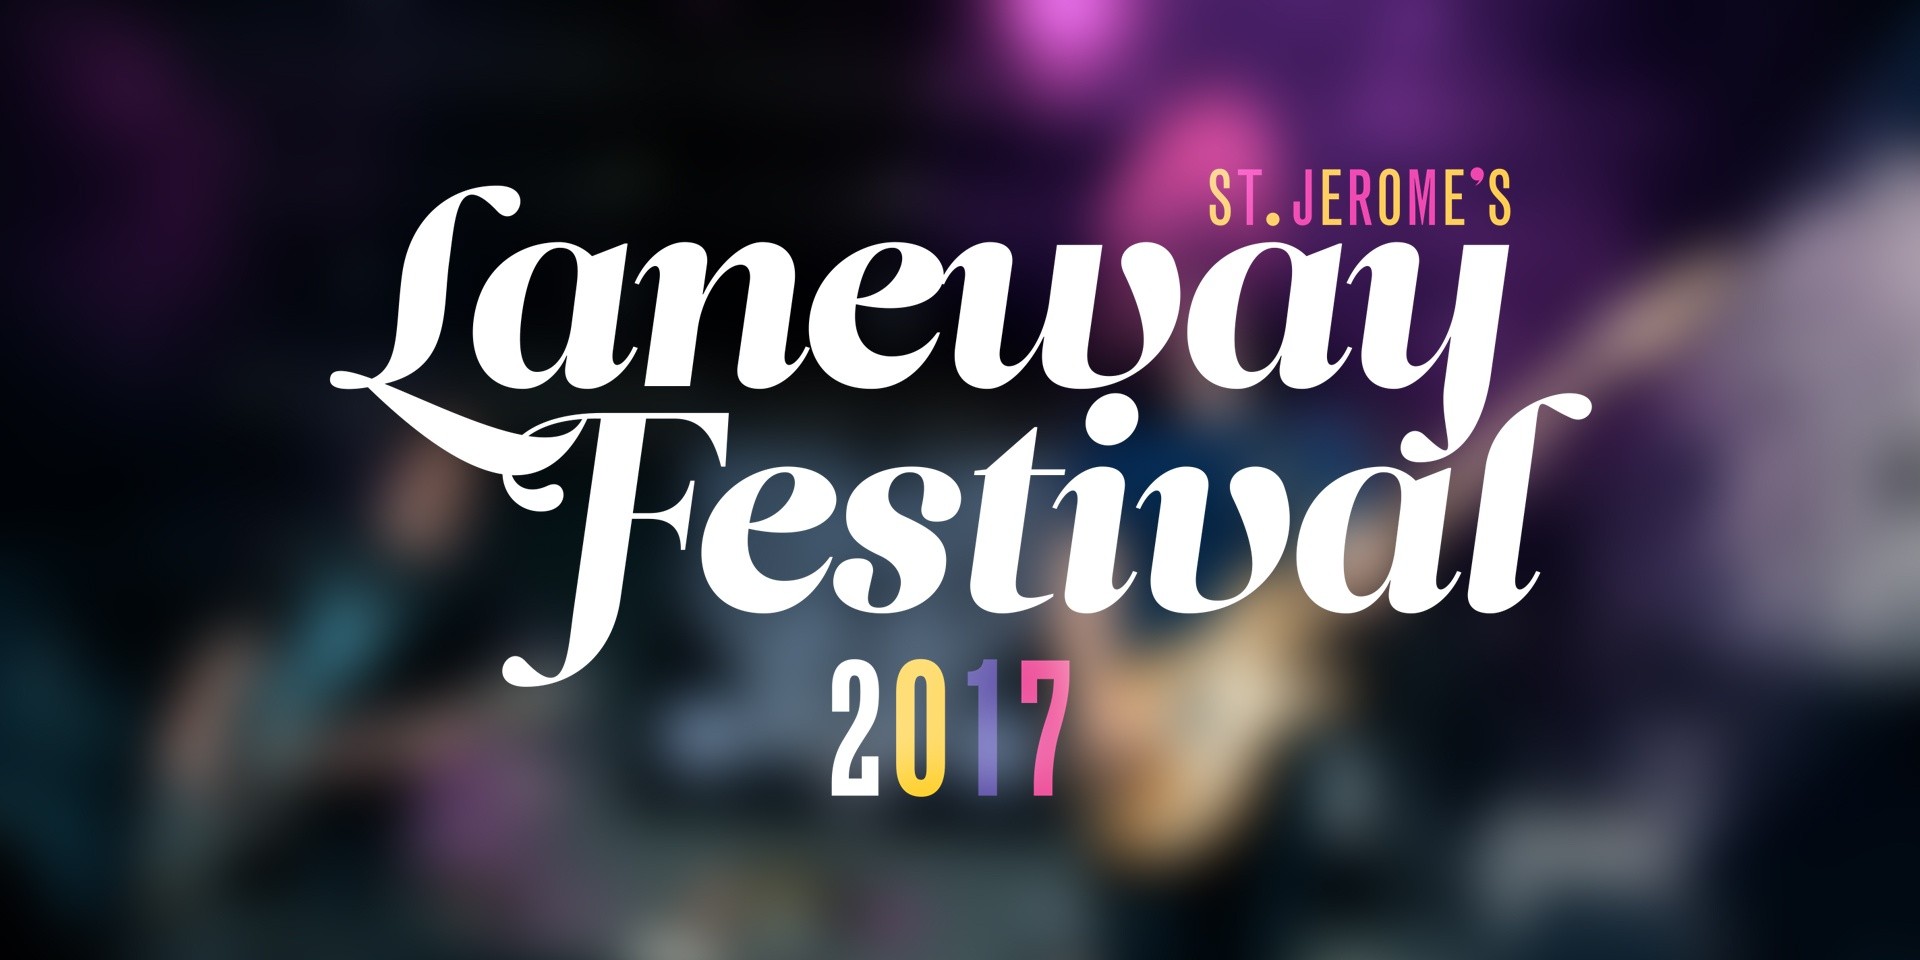 Here's what we know about Laneway Festival 2017 in Singapore so far